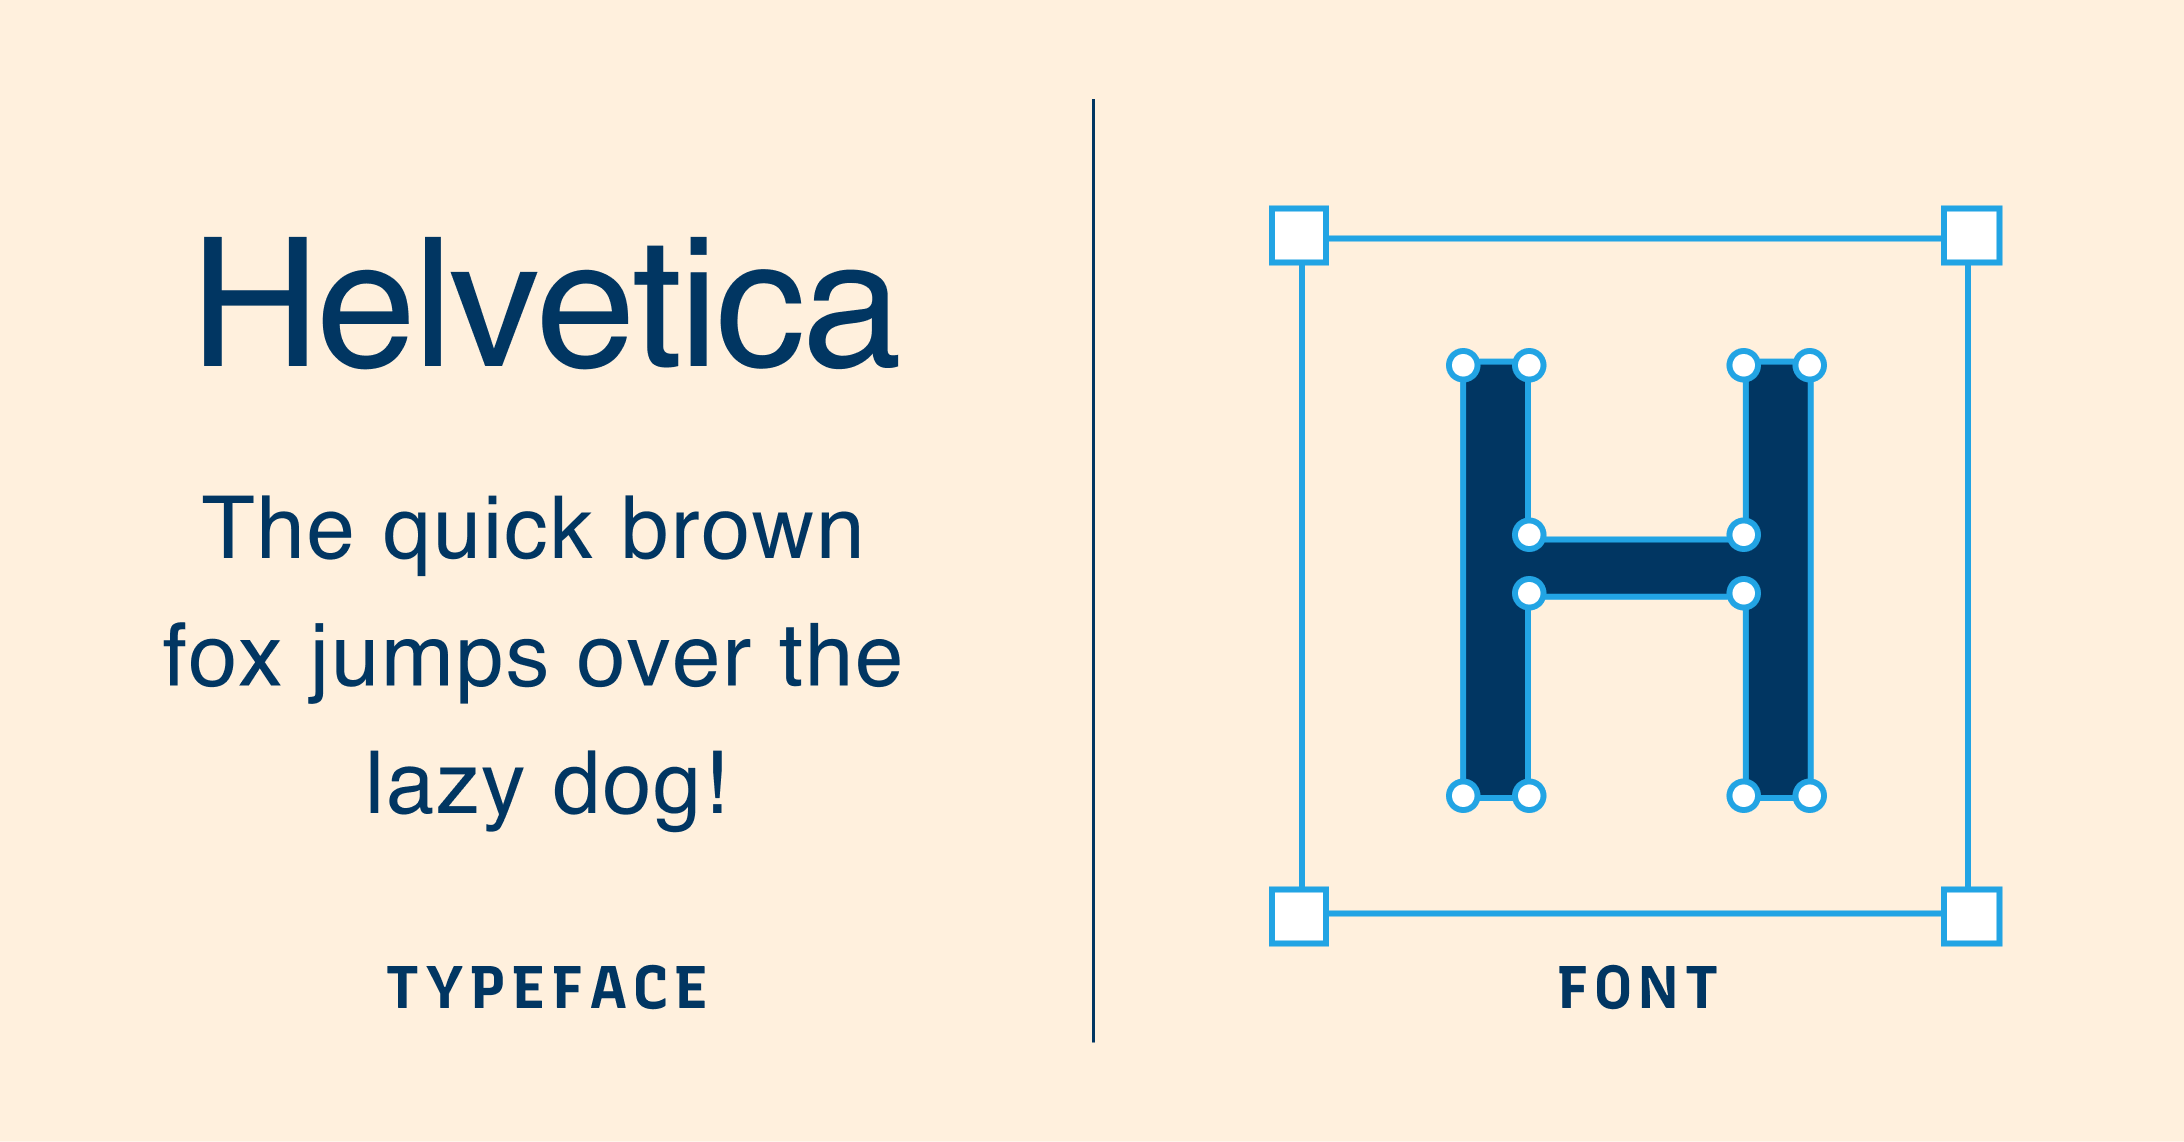 Typeface describes style, while font describes digital, graphic representation of a typeface. 